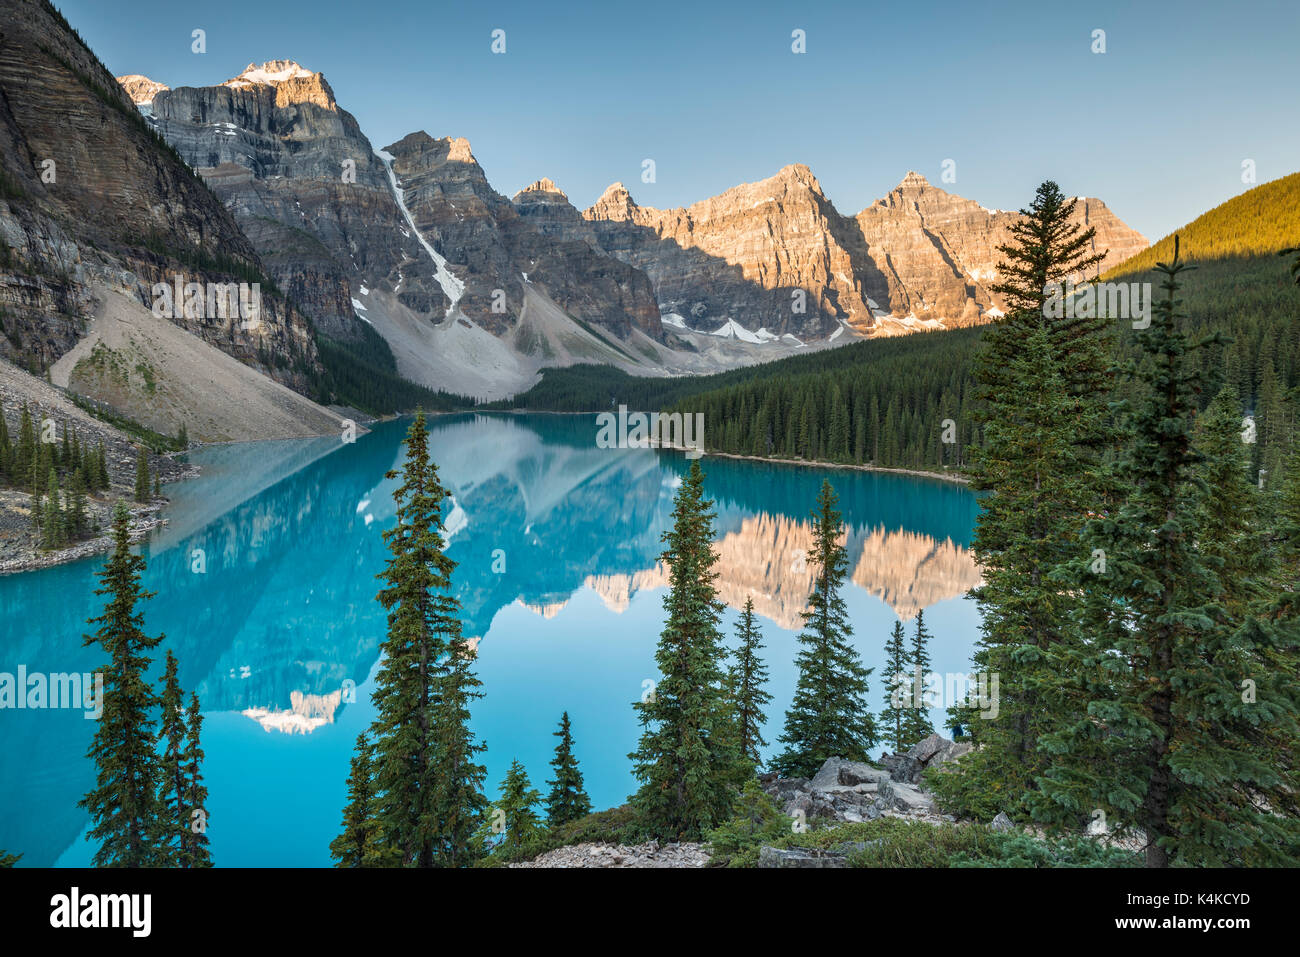 Moraine Lake, Valley of the Ten Peaks, Canadian Rocky Mountains, Banff National Park, Alberta, Canada Stock Photo